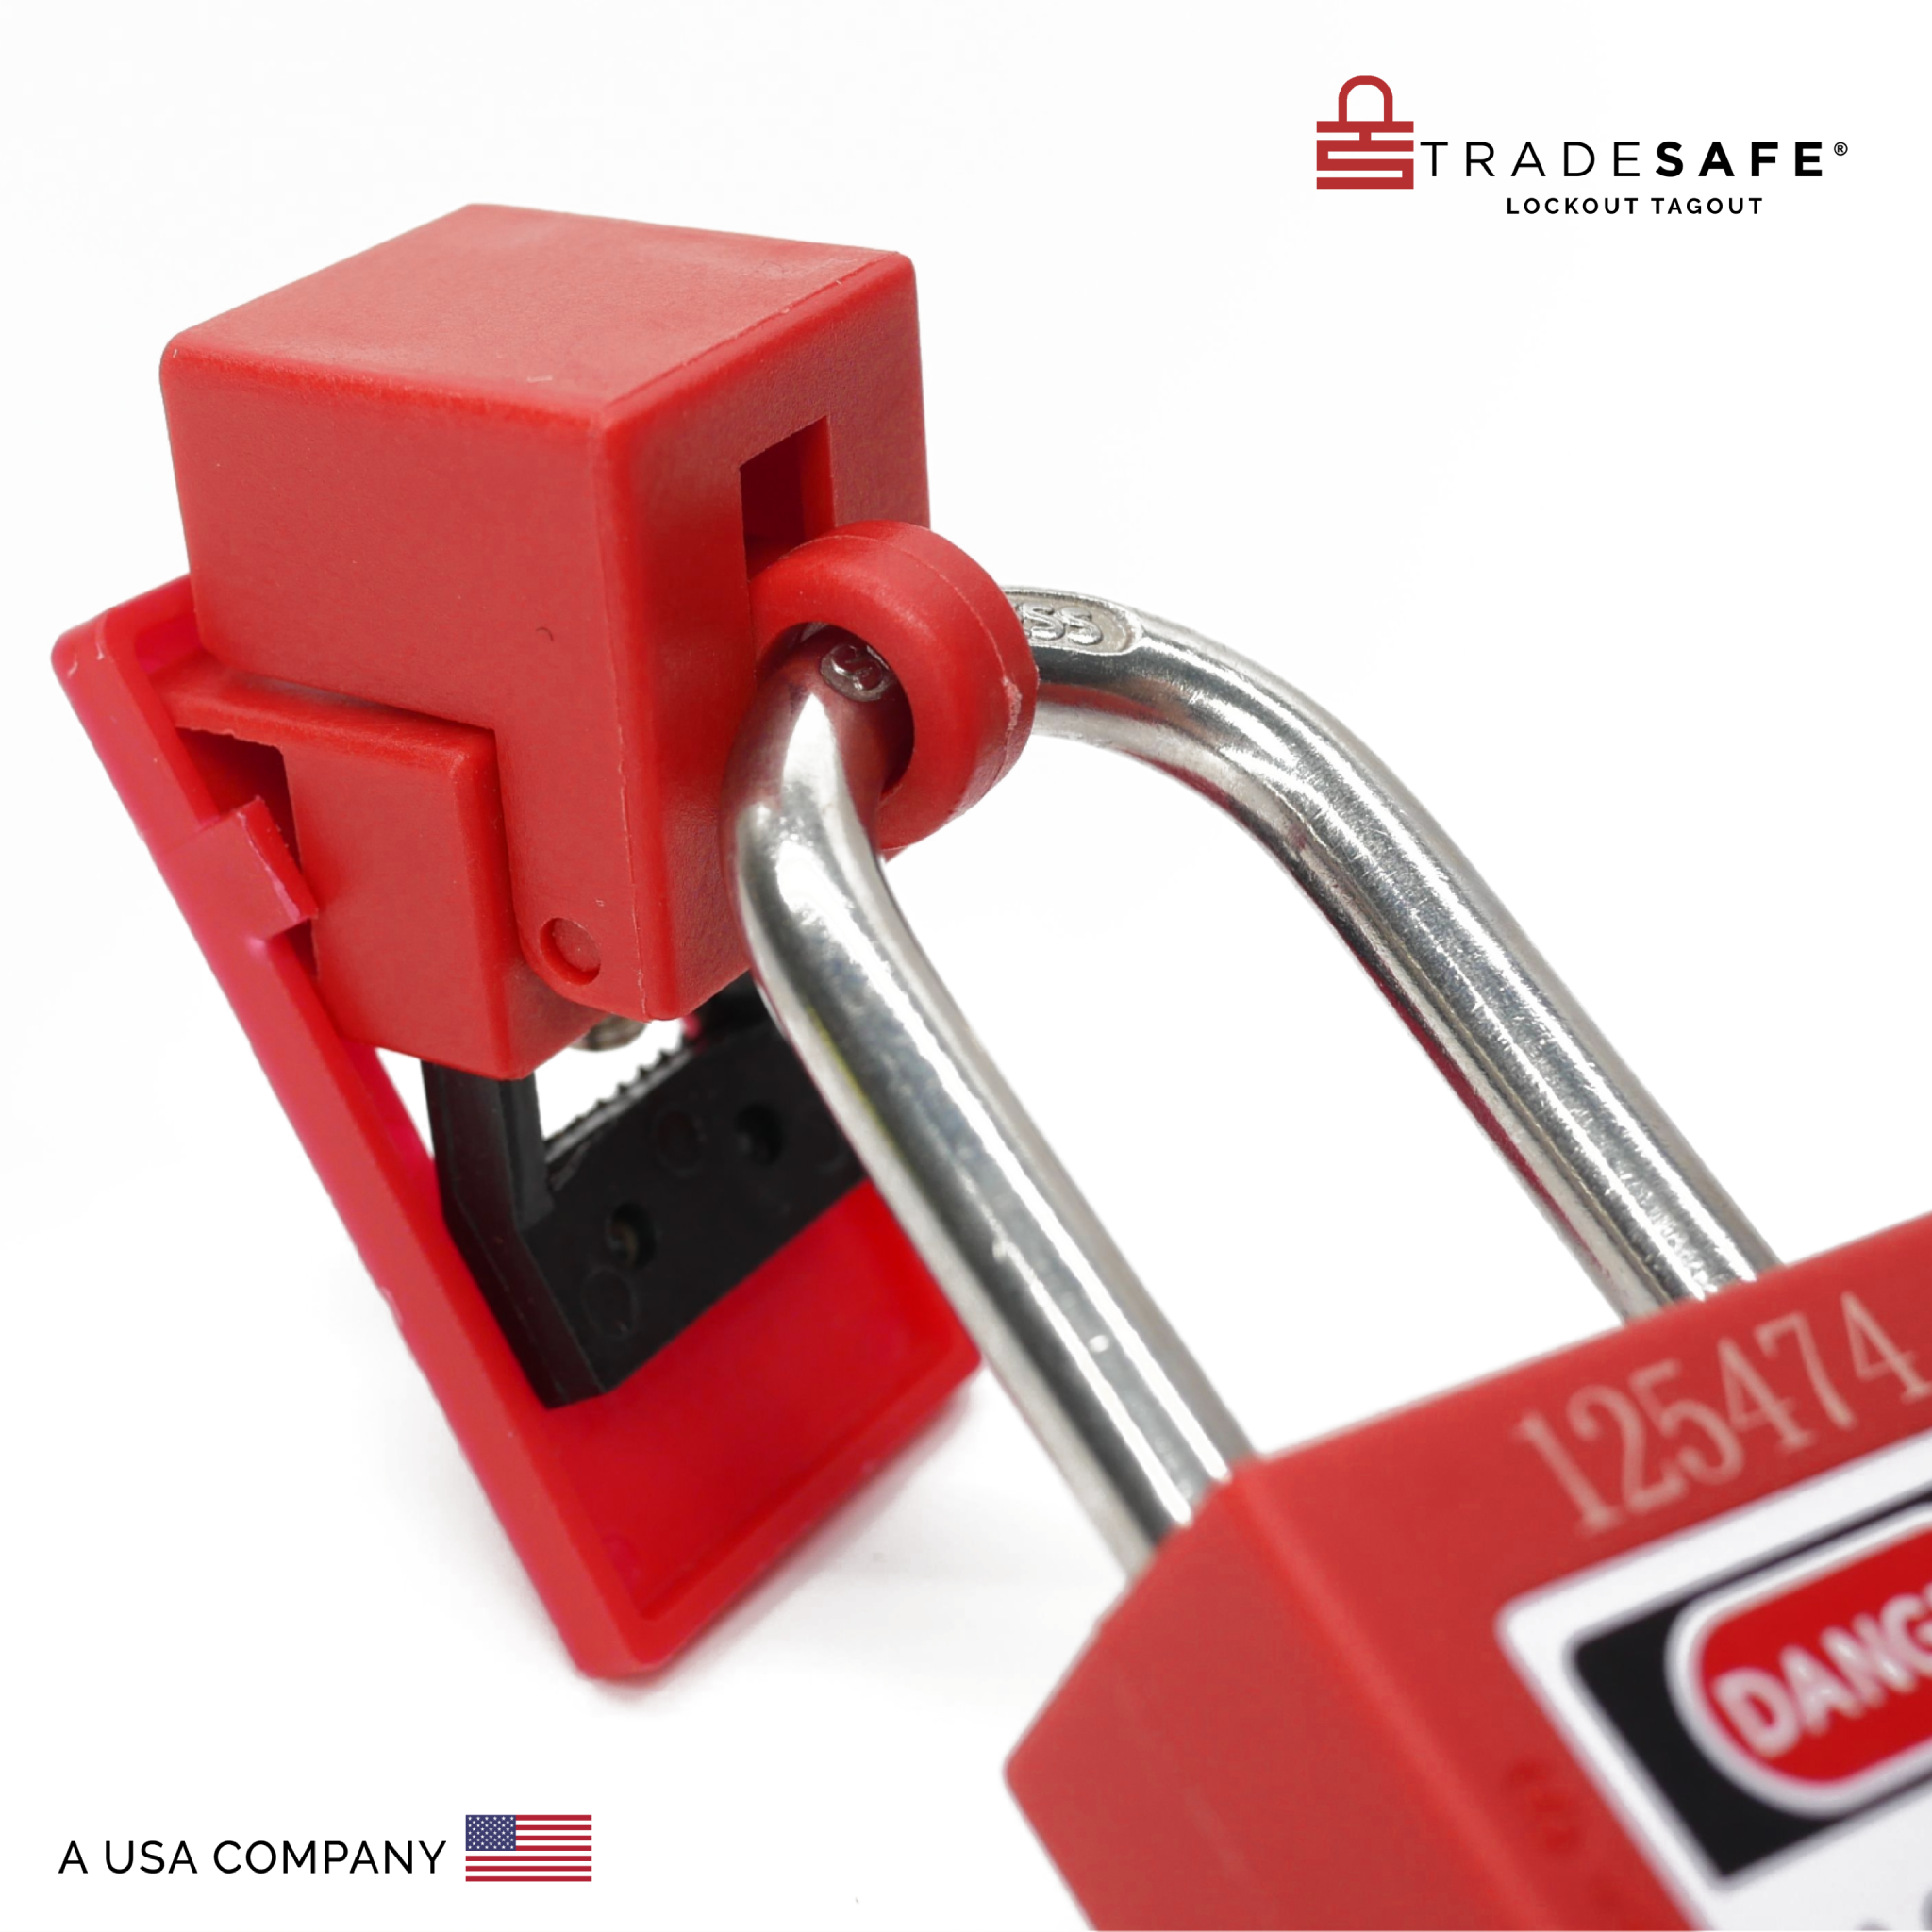 TRADESAFE Lockout Tagout Steel Cable Locks with Keys - 10 Red